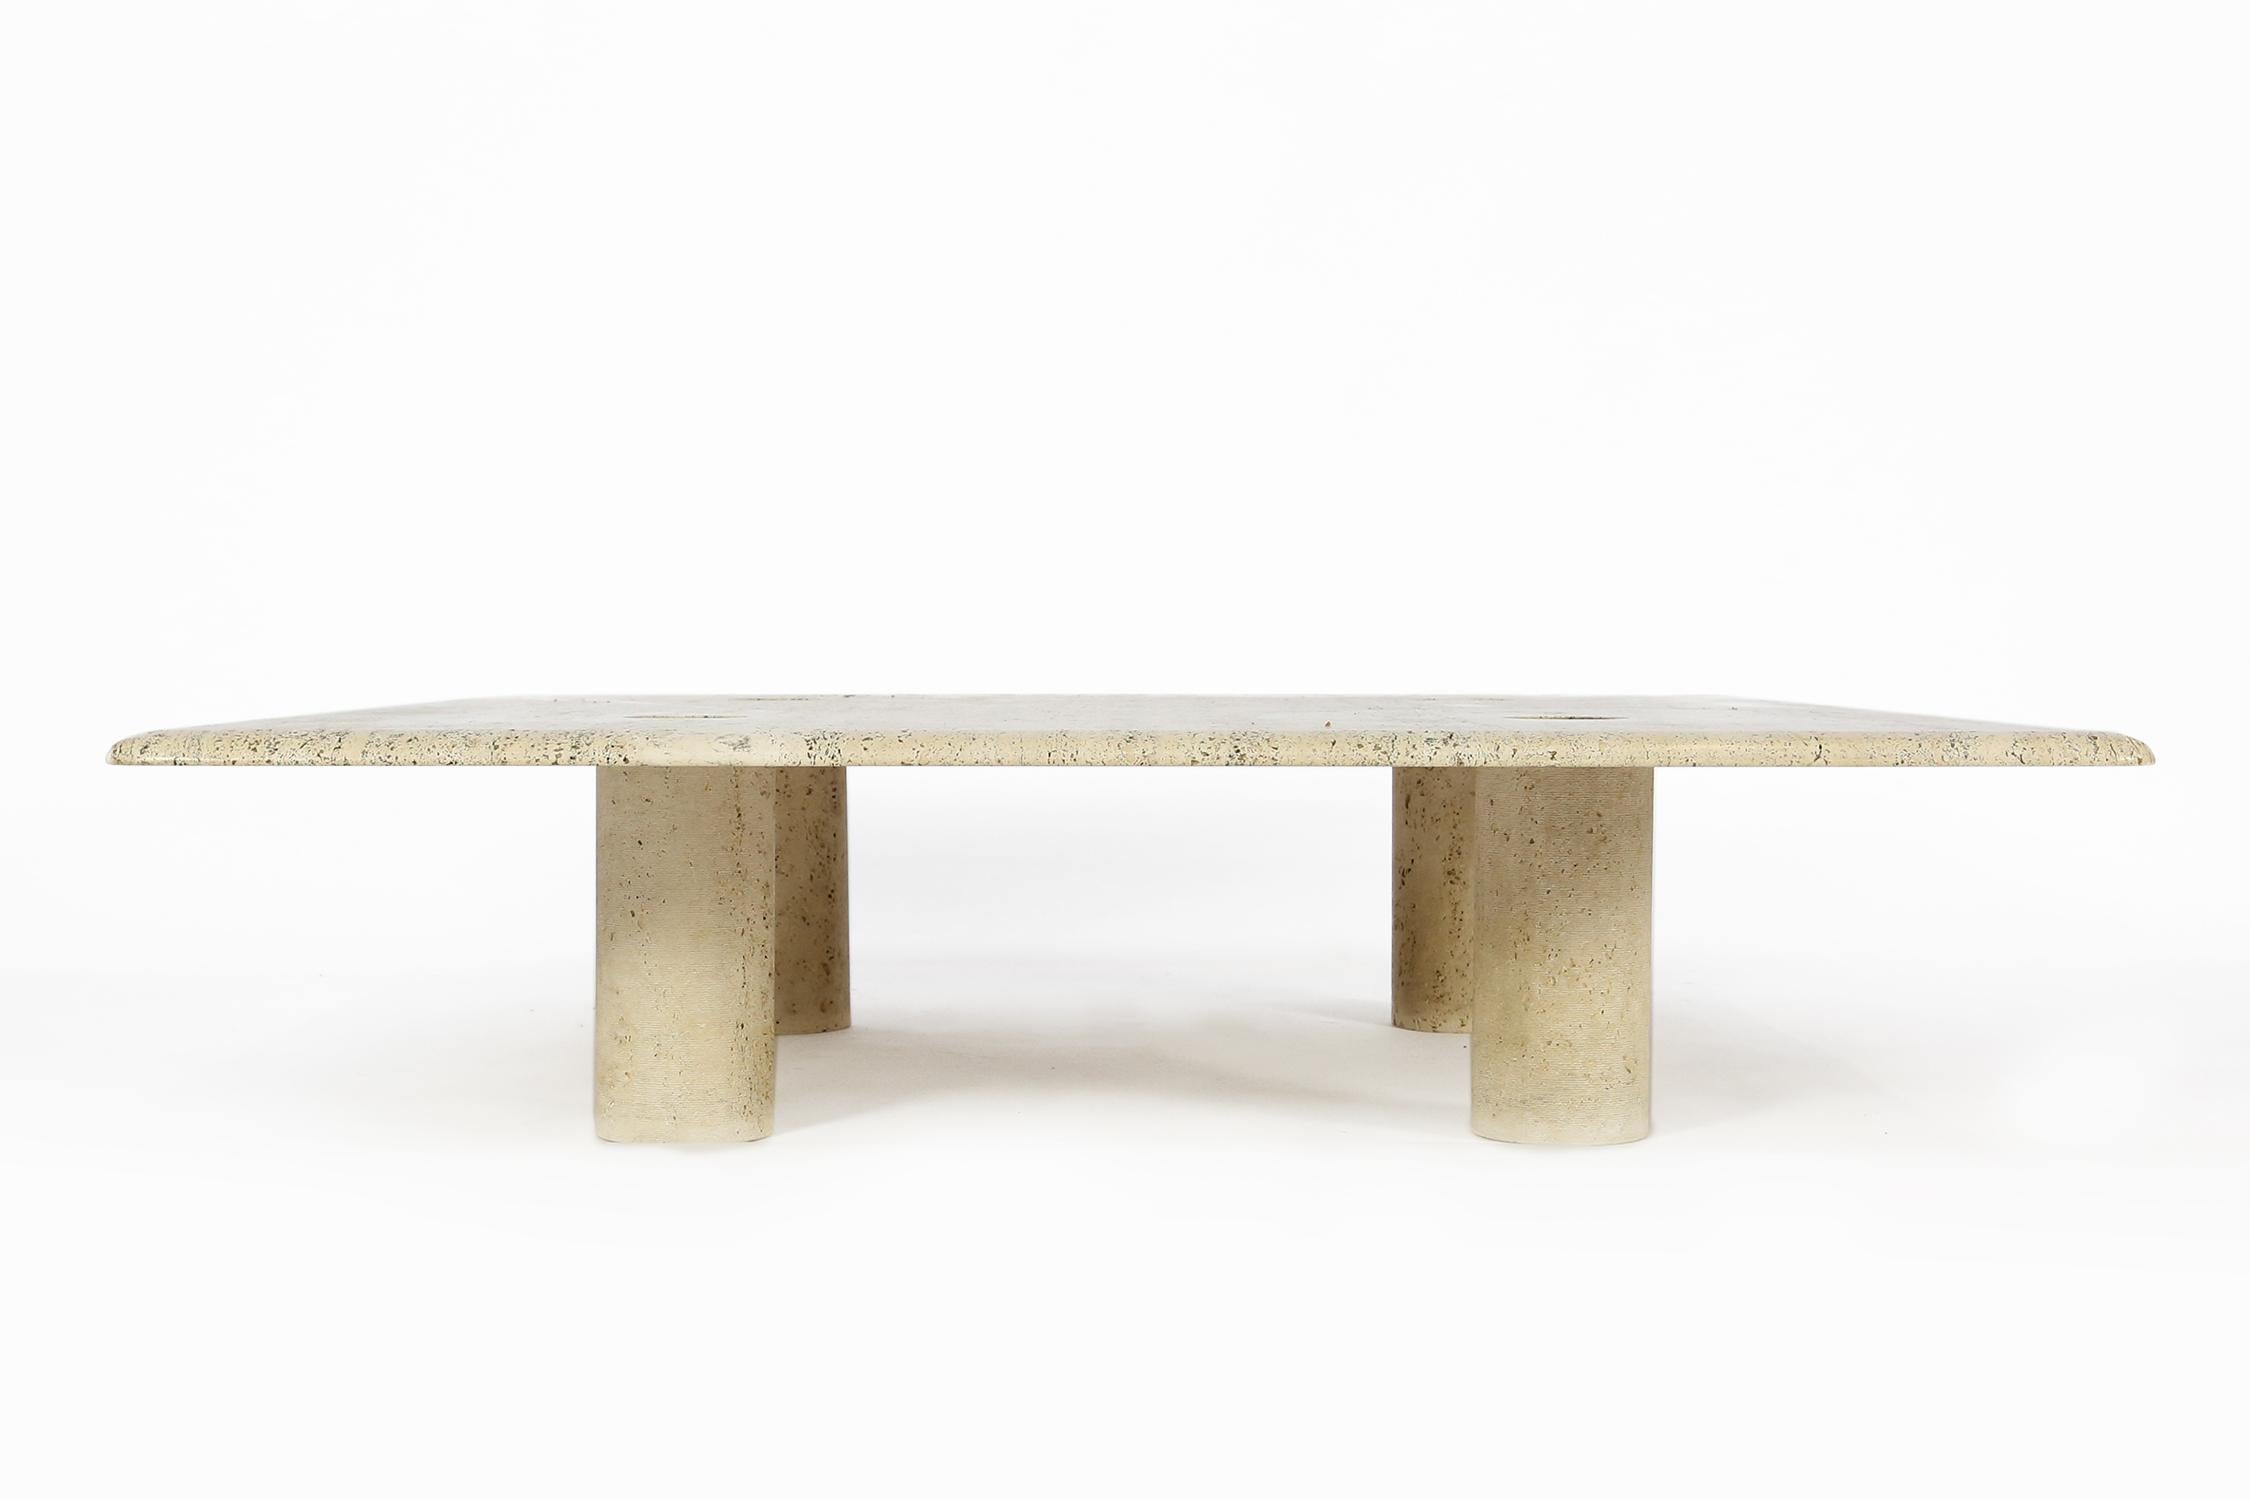 Travertine coffee or cocktail table with interlocking travertine legs by Angelo Mangiarotti for Up&Up, Italy, 1970s.
This is the biggest version available and measures: 120cm x 120cm x 28.5cm.